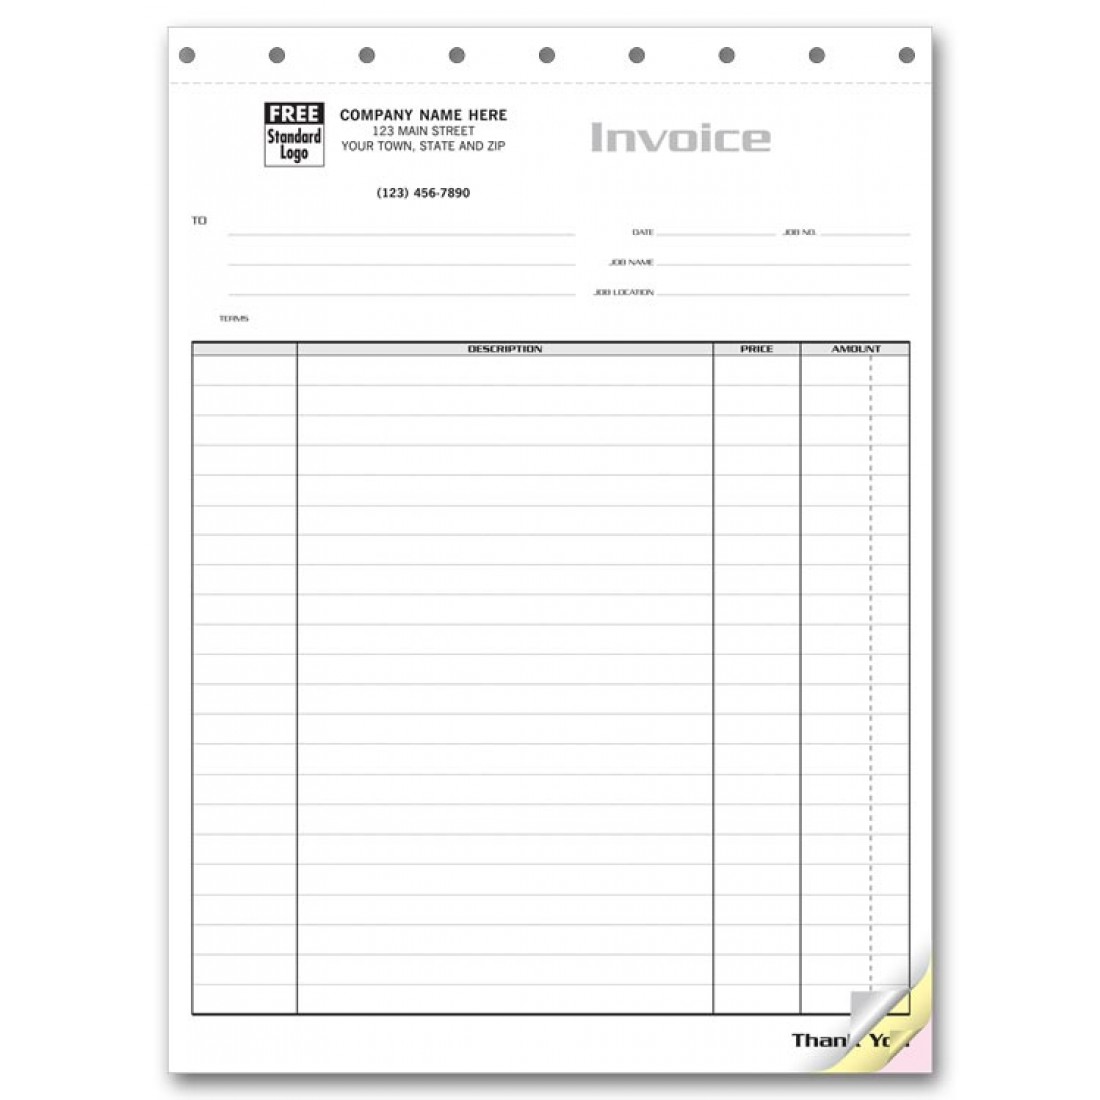 job-invoice-forms-basic-free-shipping